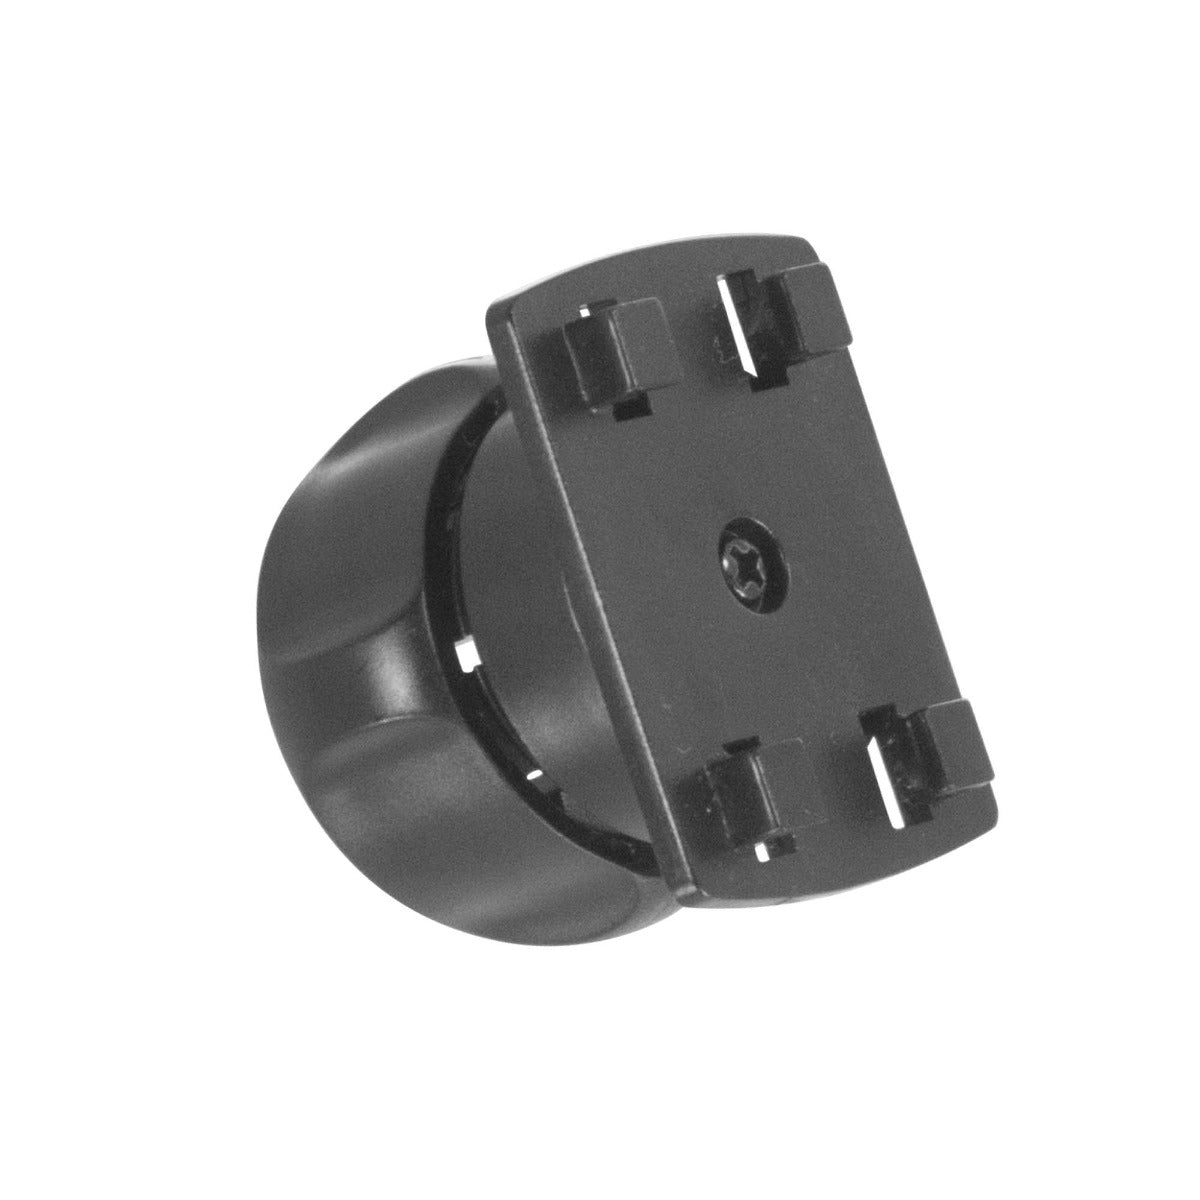 iBOLT 22mm Ball Socket to 4 Prong adapter with Tightening Ring